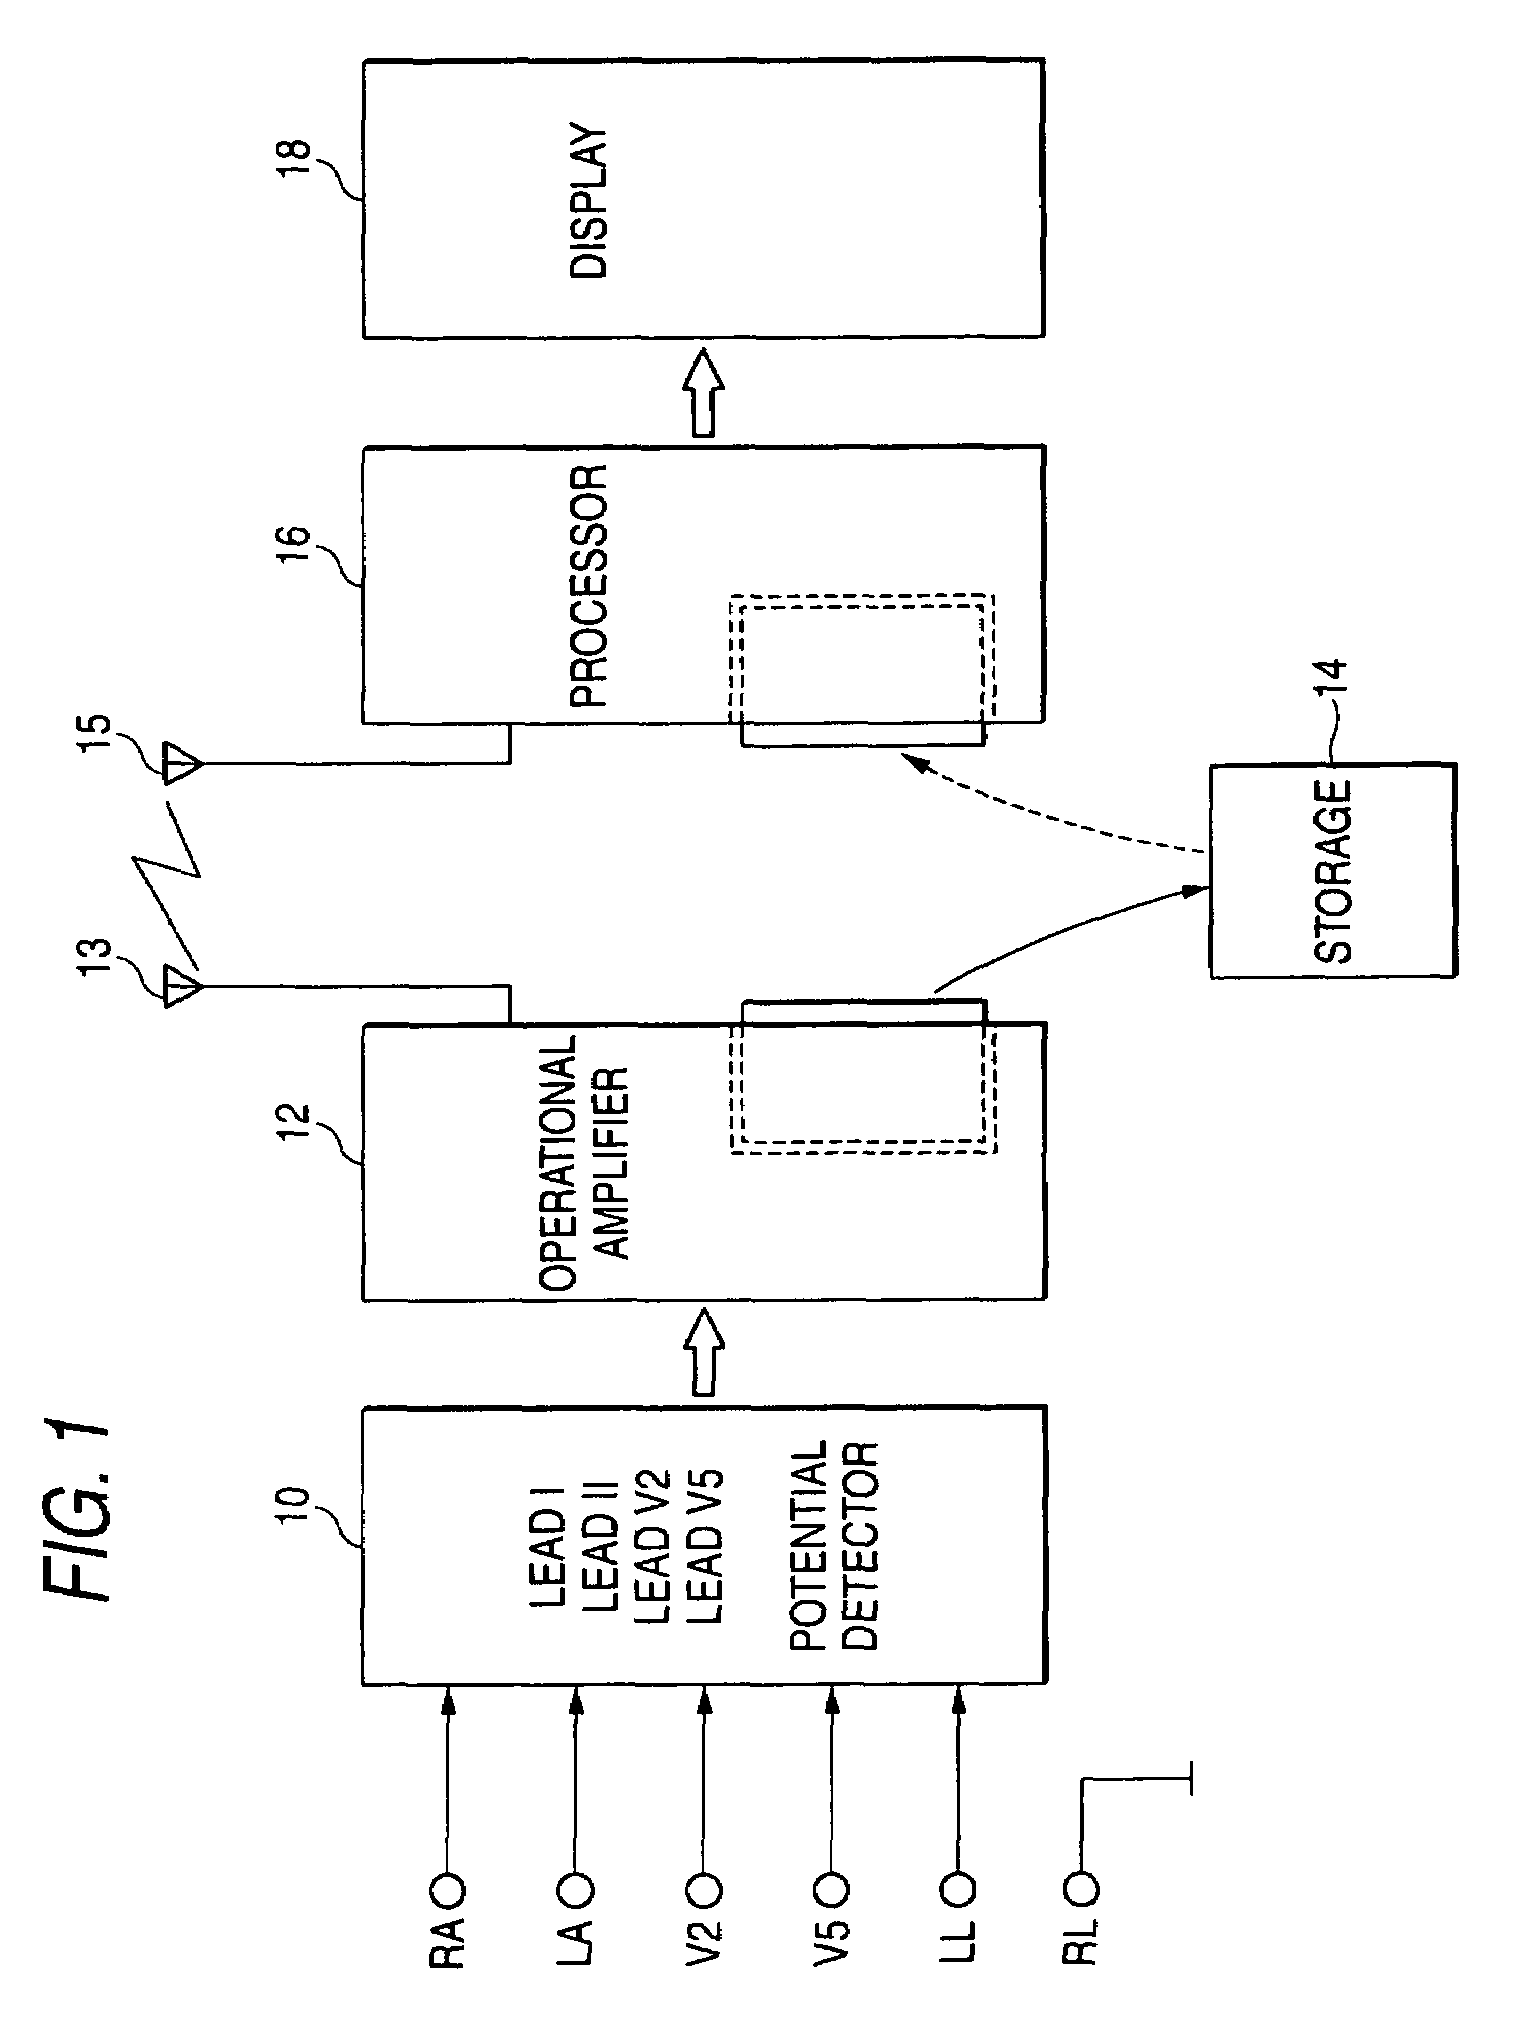 Method for deriving standard 12-lead electrocardiogram, and electrocardiograph using the same